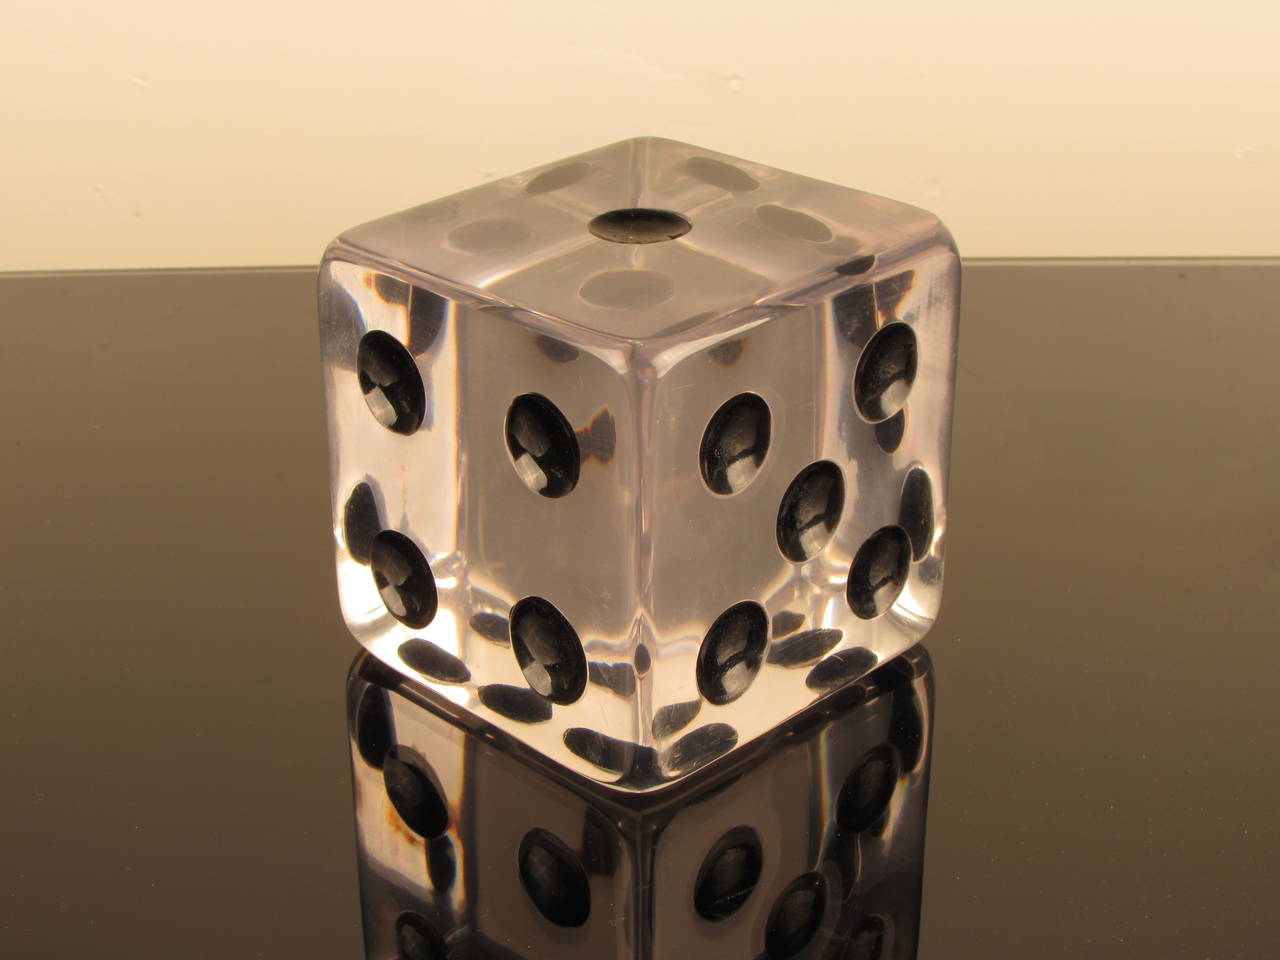 Incredible large lucite dice bookend or paperweight with enamel details in the Pop art style. Lucite is crystal clear and in excellent condition for its age.